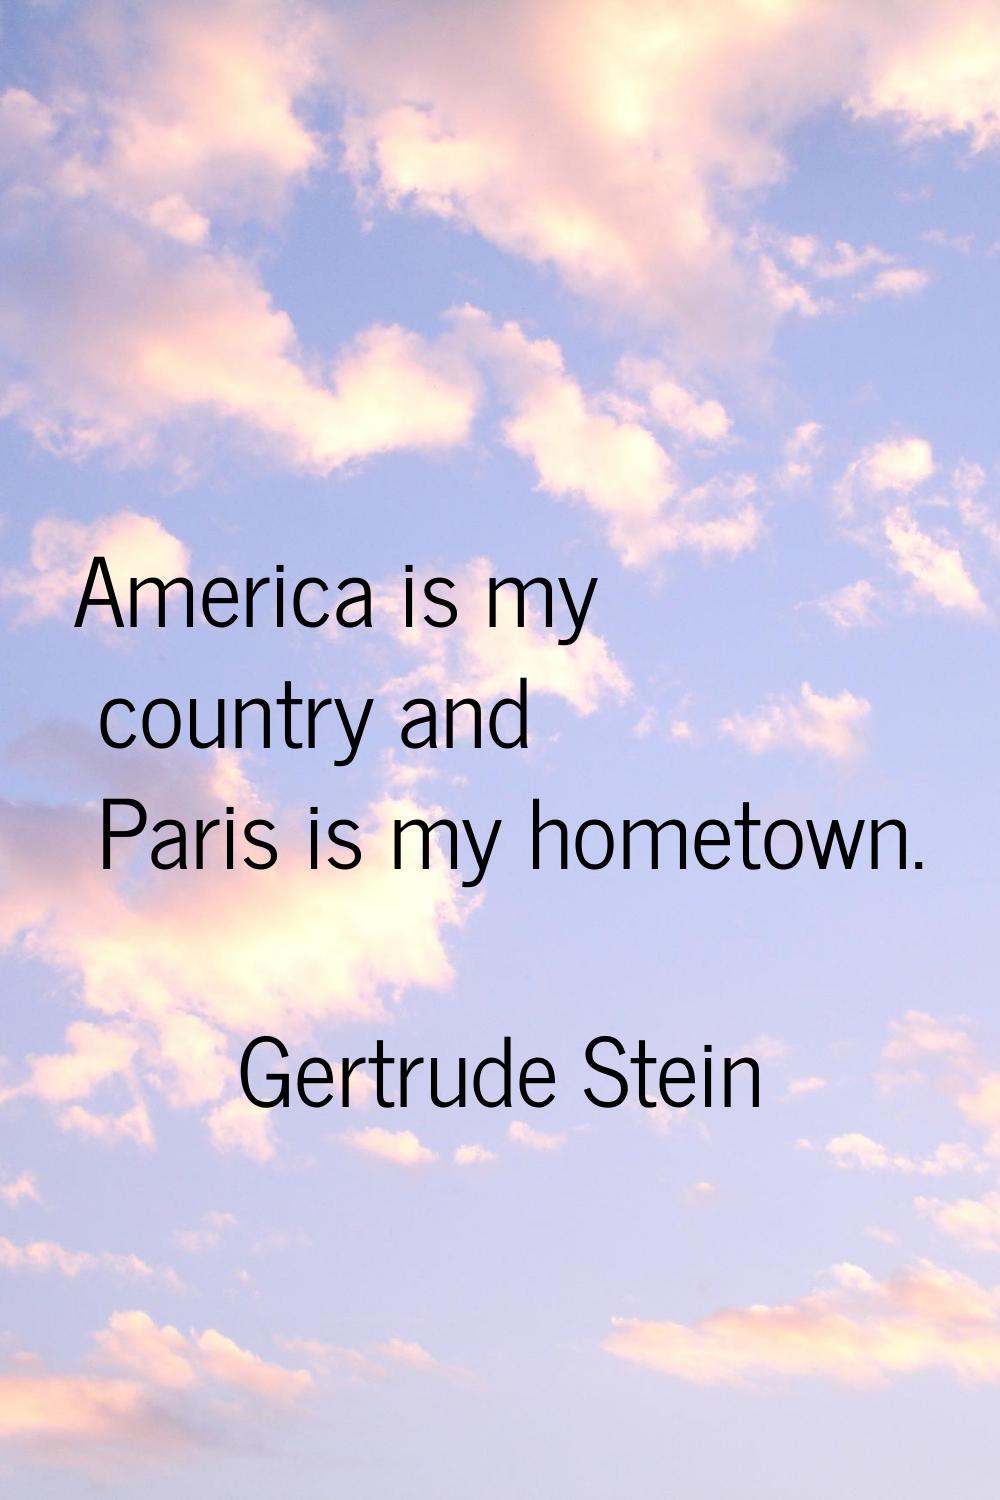 America is my country and Paris is my hometown.